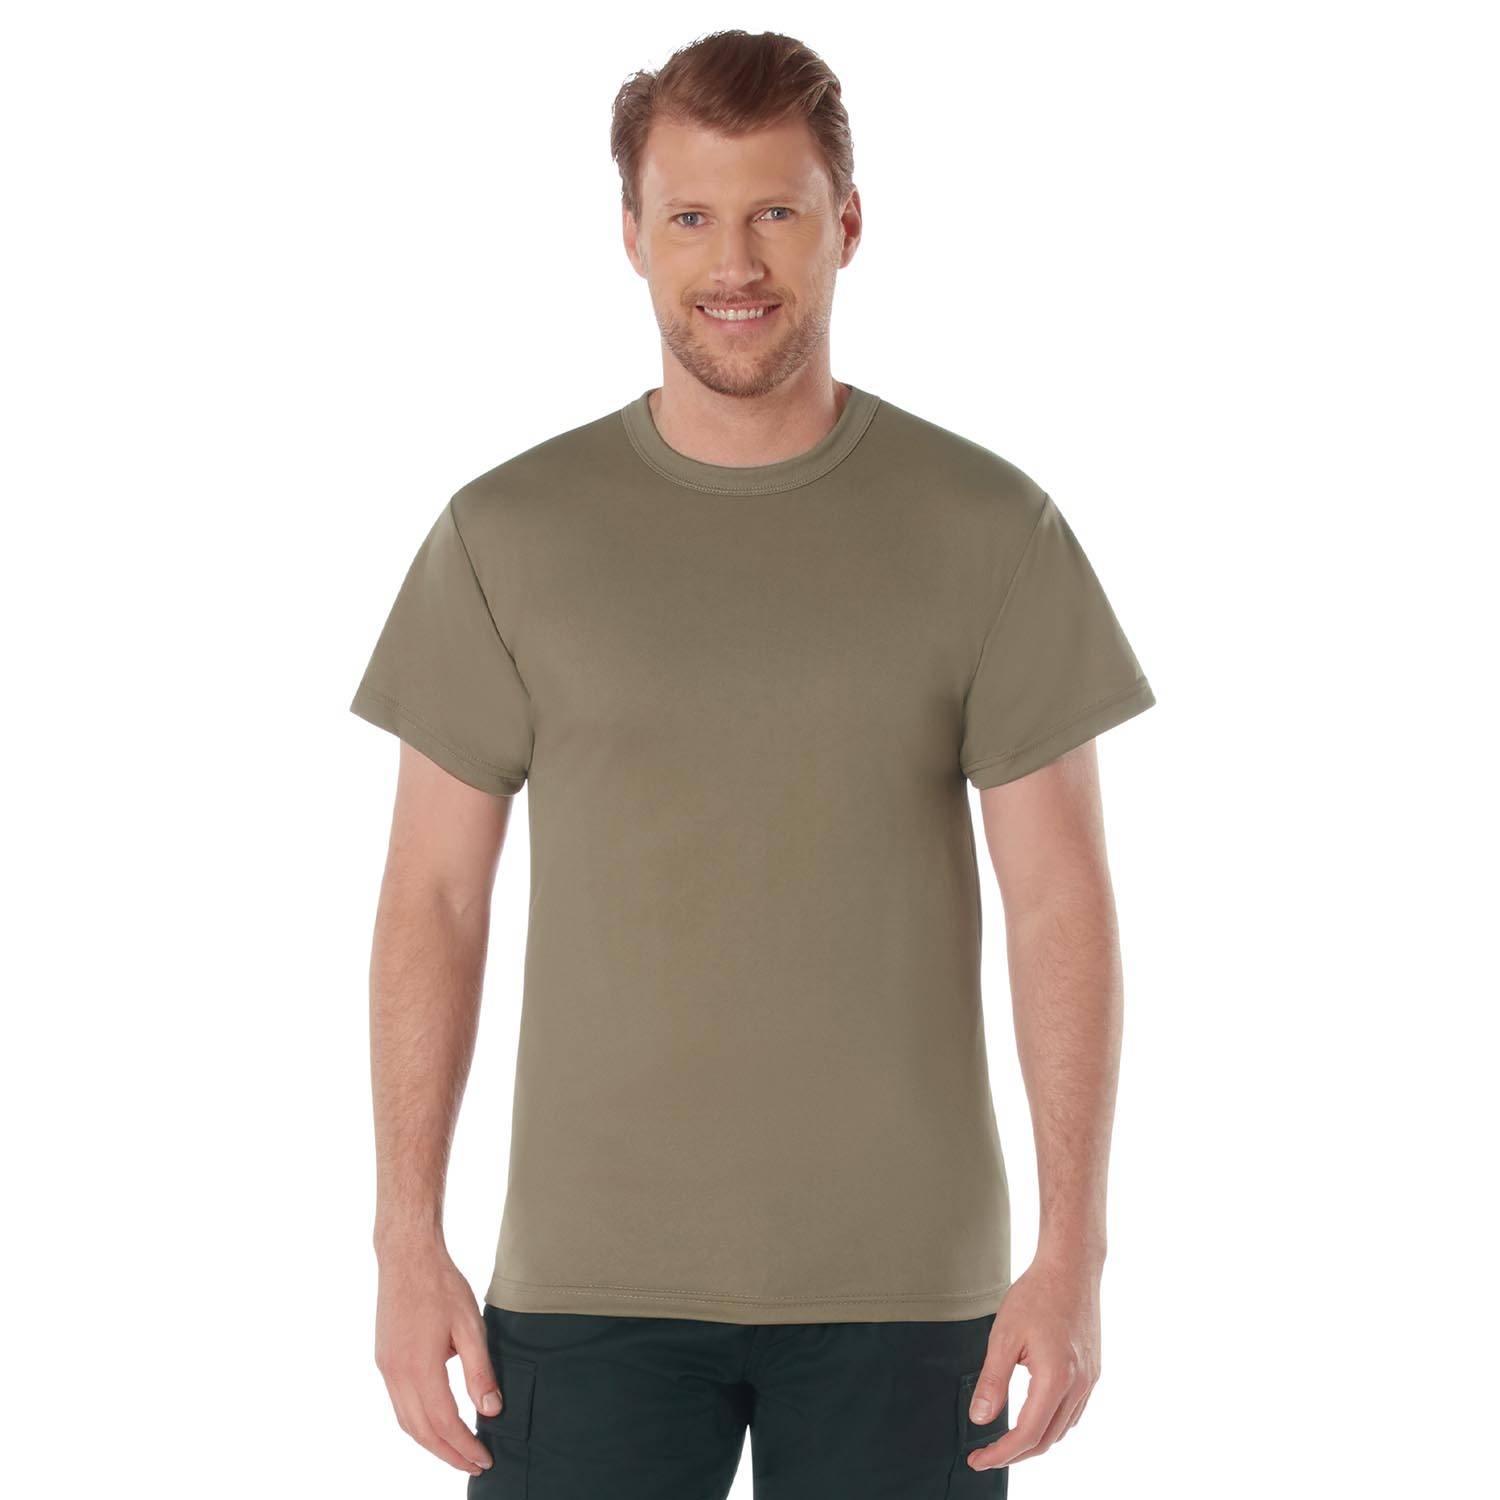 ROTHCO QUICK DRY MOISTURE WICKING T-SHIRT